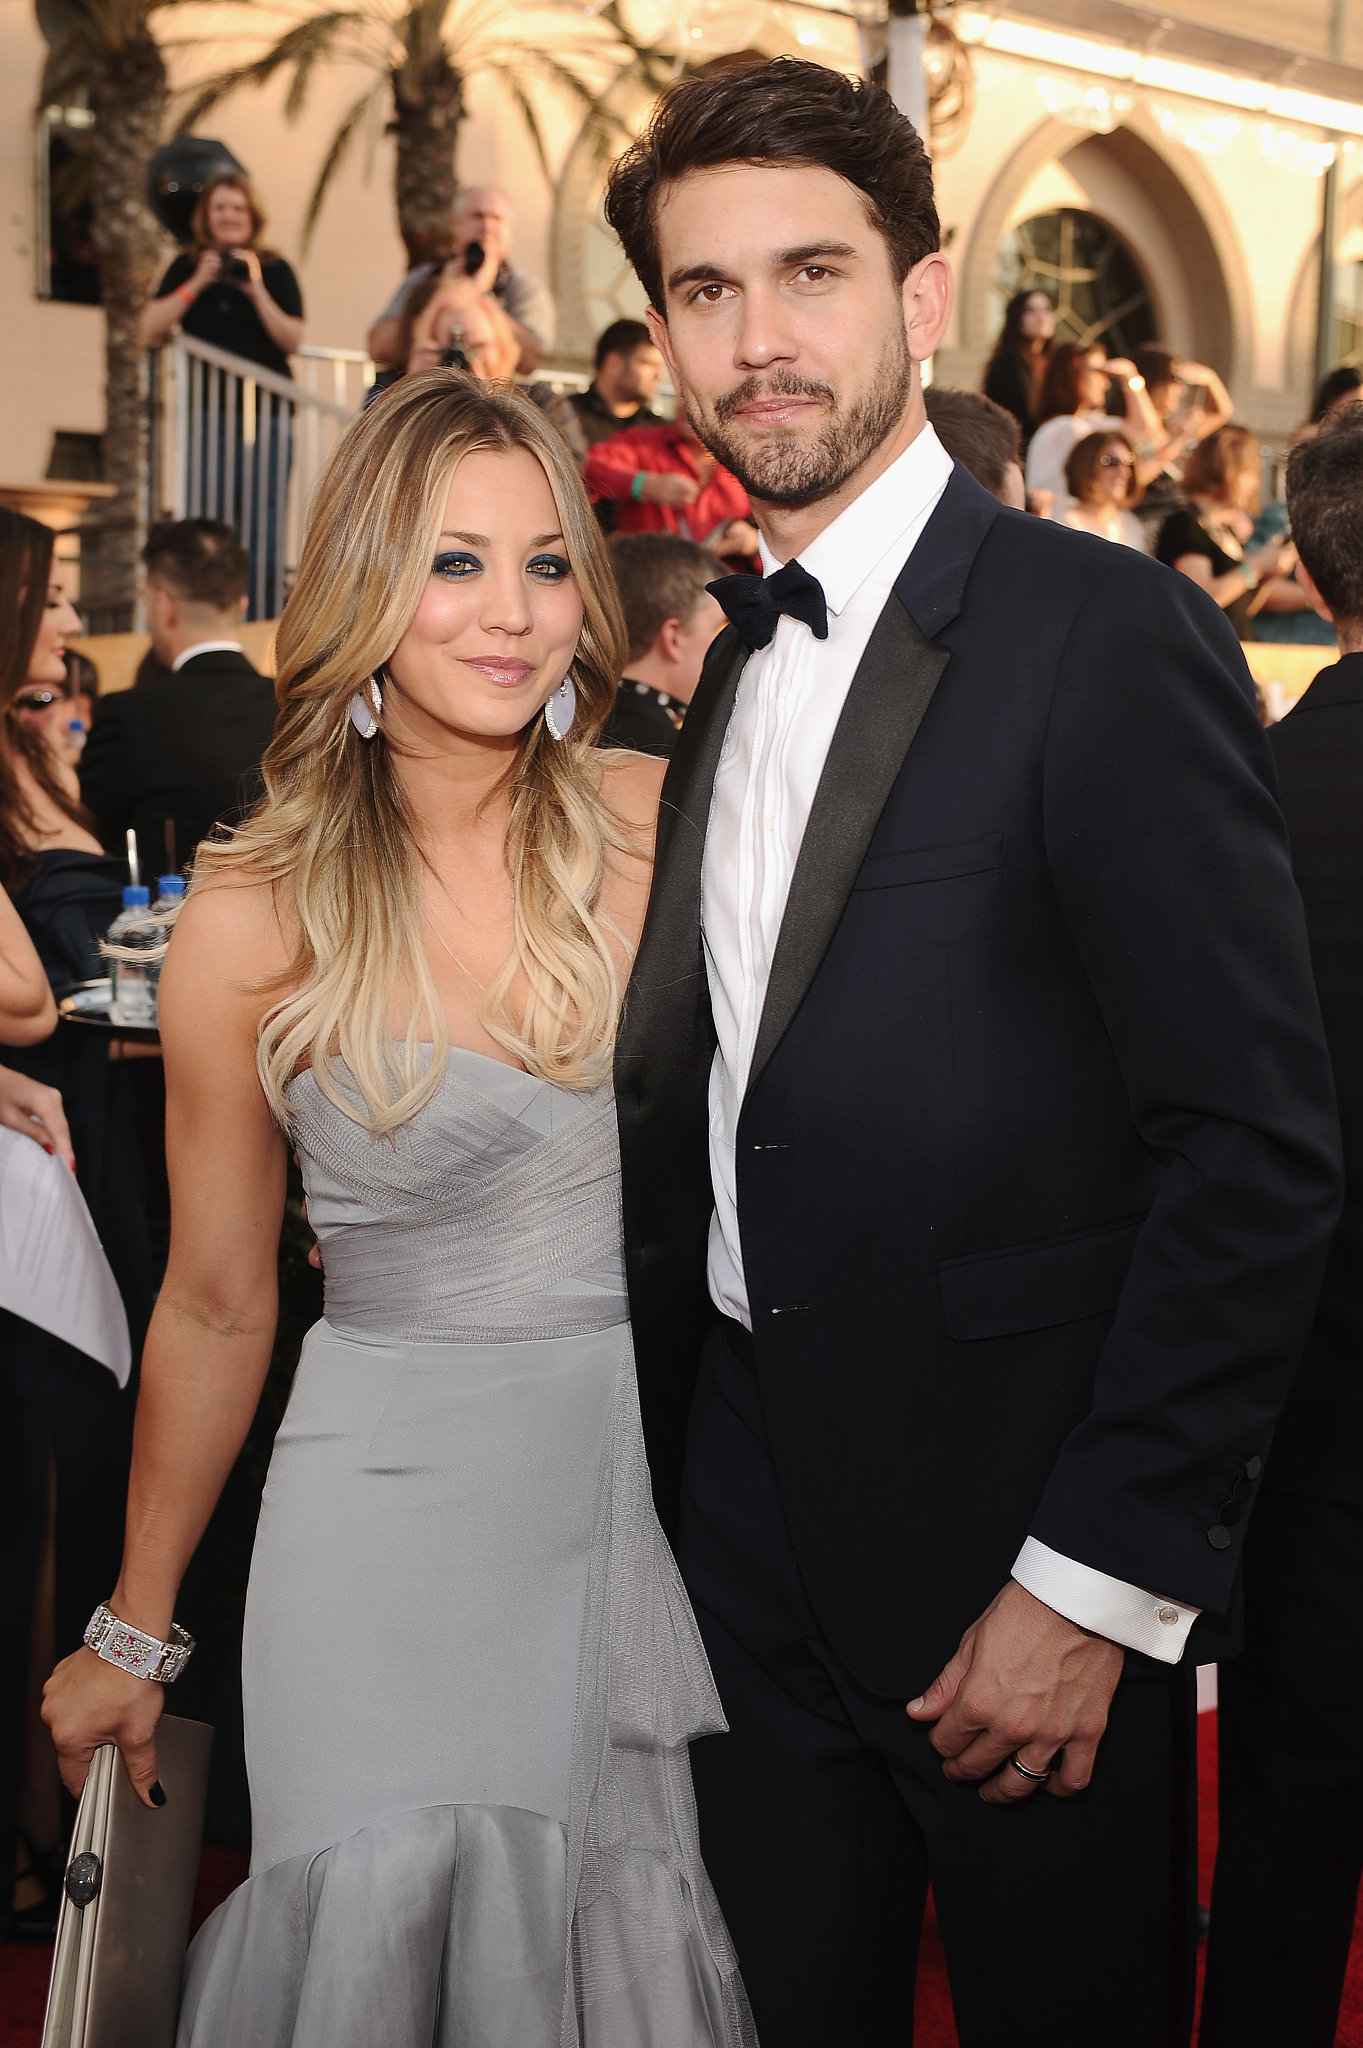 Kaley Cuoco Stayed Close To Her New Husband Ryan Sweeting On The